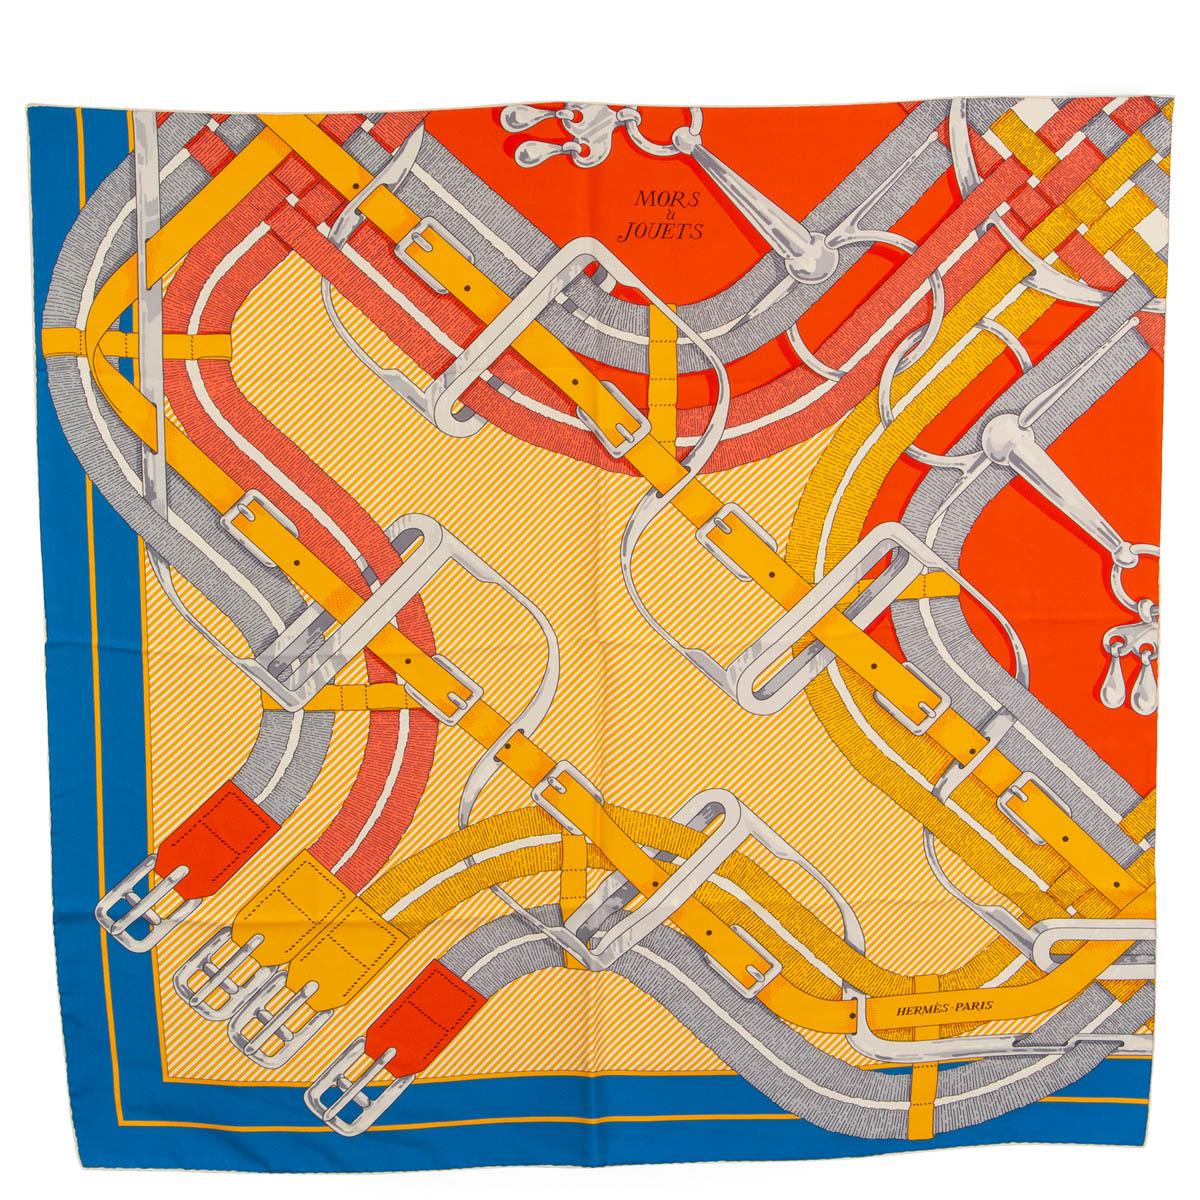 100% authentic Hermes 'Mors a Jouets Chemise Detail 90' scarf by Henri d'Origny in cobalt blue silk twill (100%) with details in orange, red, grey and yellow. Brand new.

Measurements
Width	90cm (35.1in)
Height	90cm (35.1in)
Henri d’Origny’s design